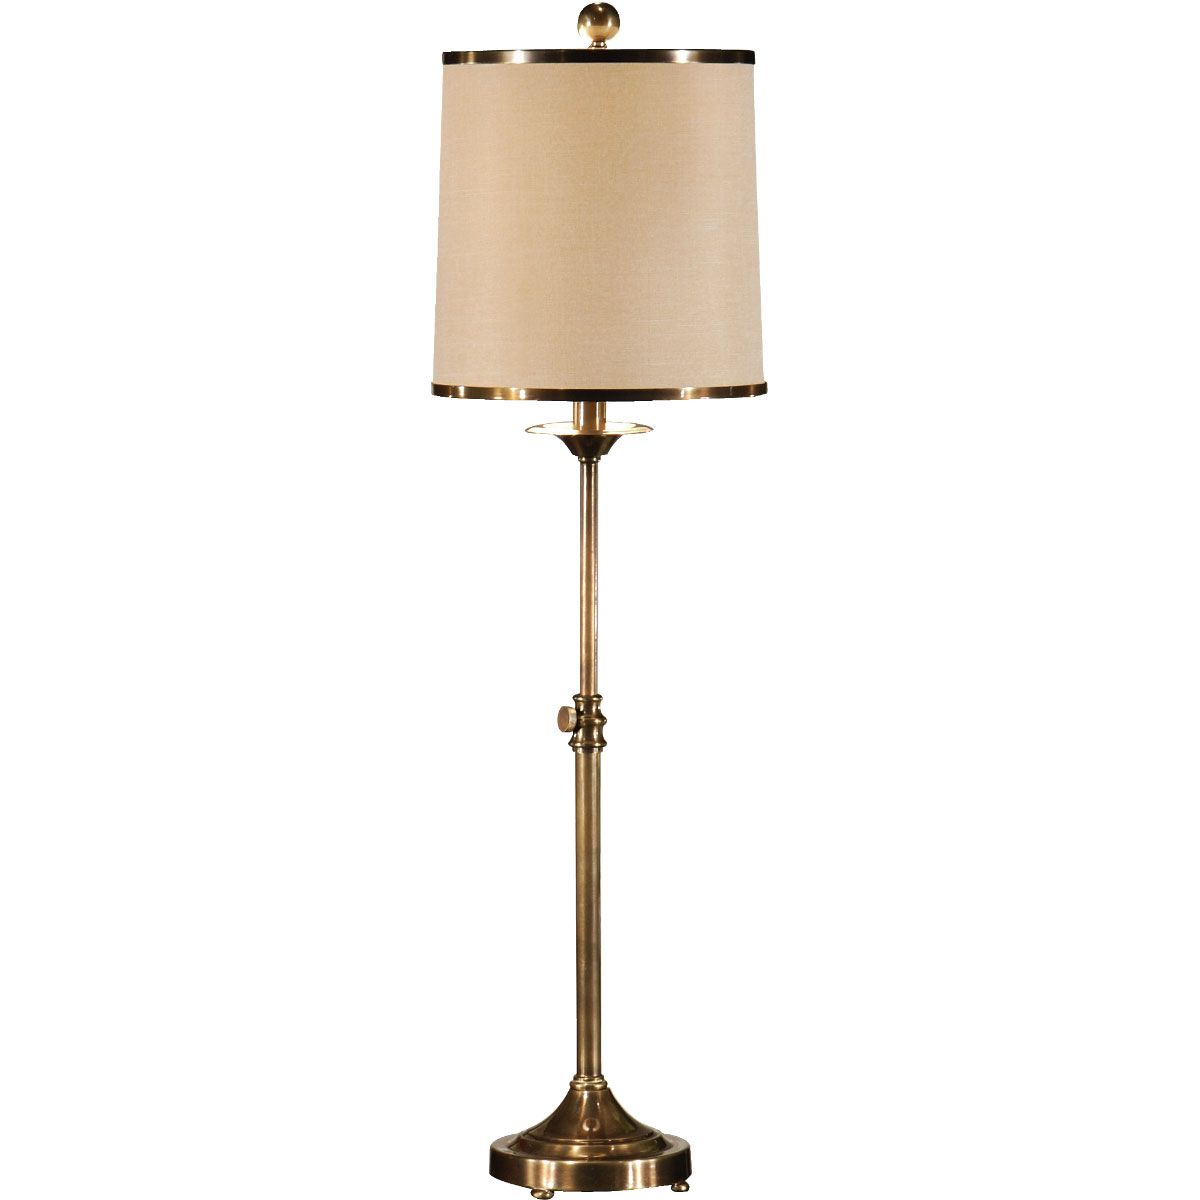 Adjustable Height Standing Lamps Within Famous Lamp With Adjustable Height – Brass Table Lamps (View 10 of 10)